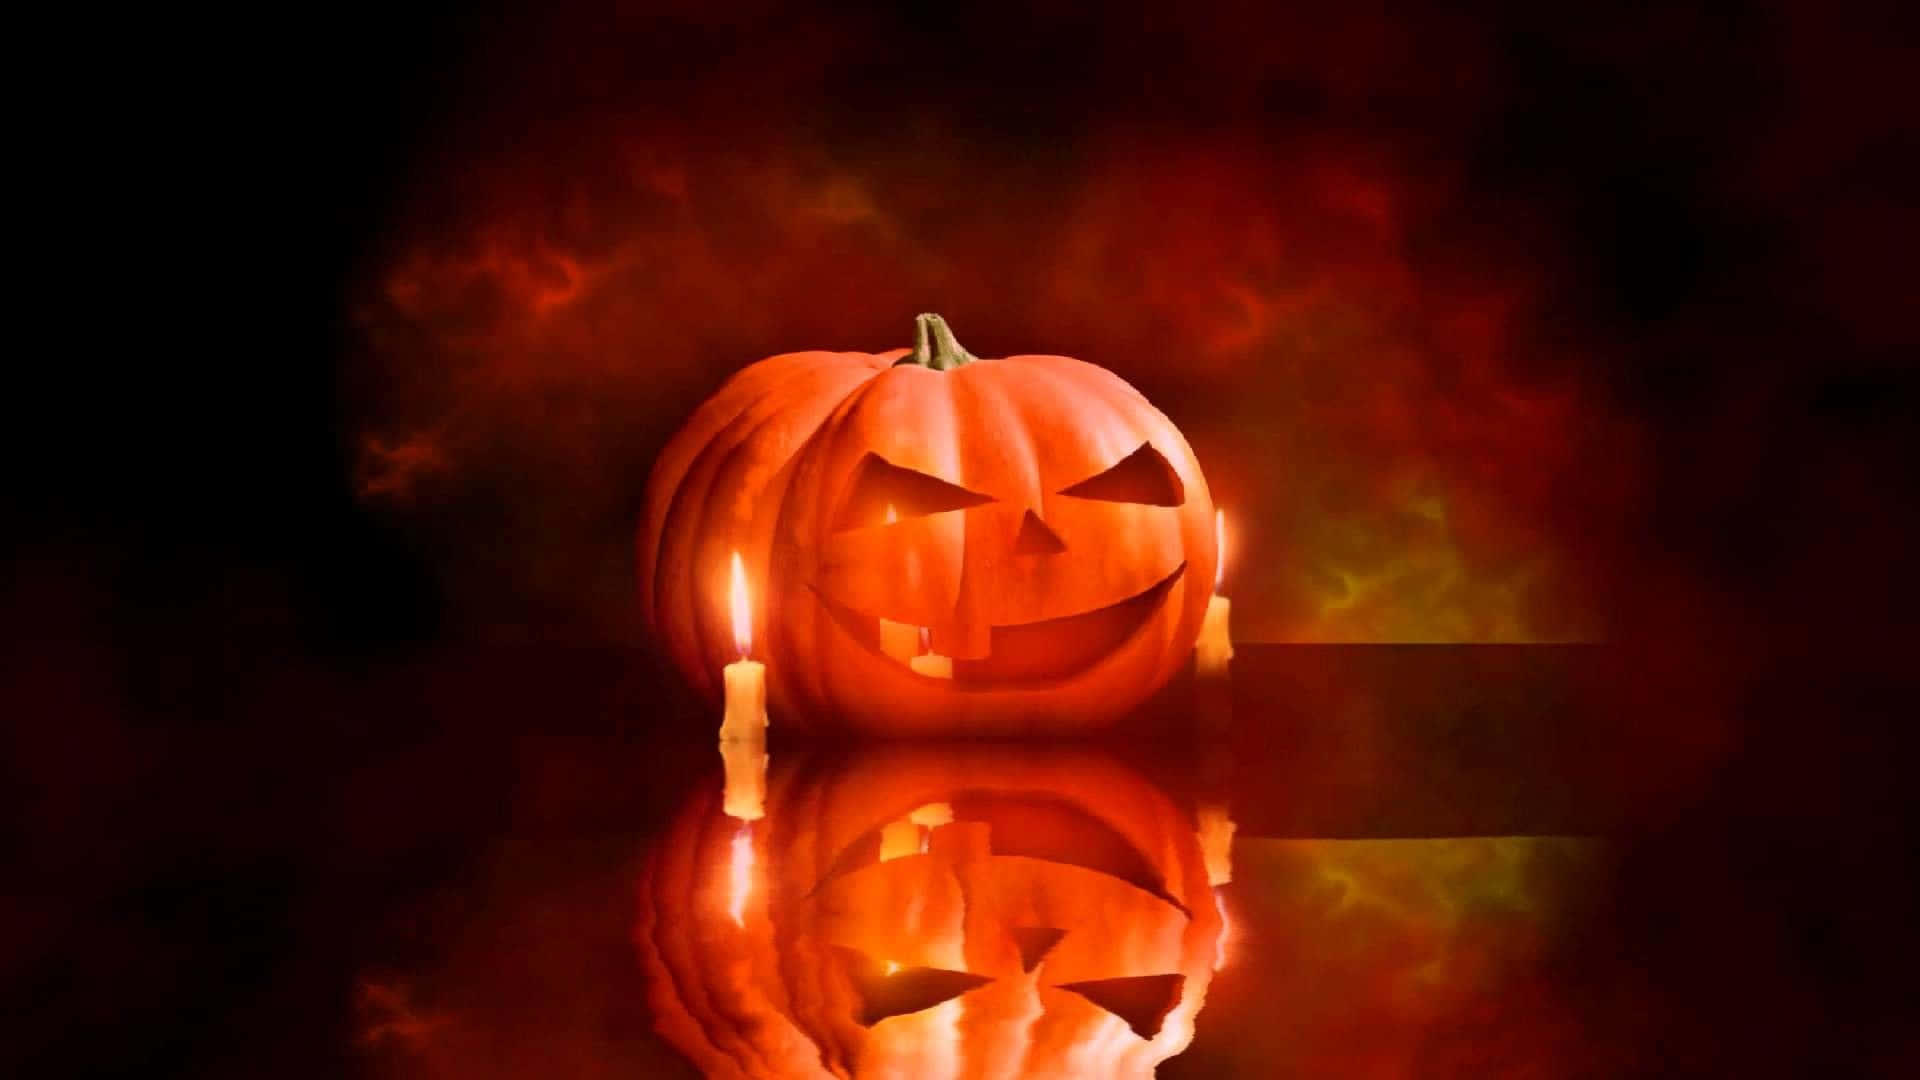 Get creeped out this season with this spooky animated halloween scene! Wallpaper